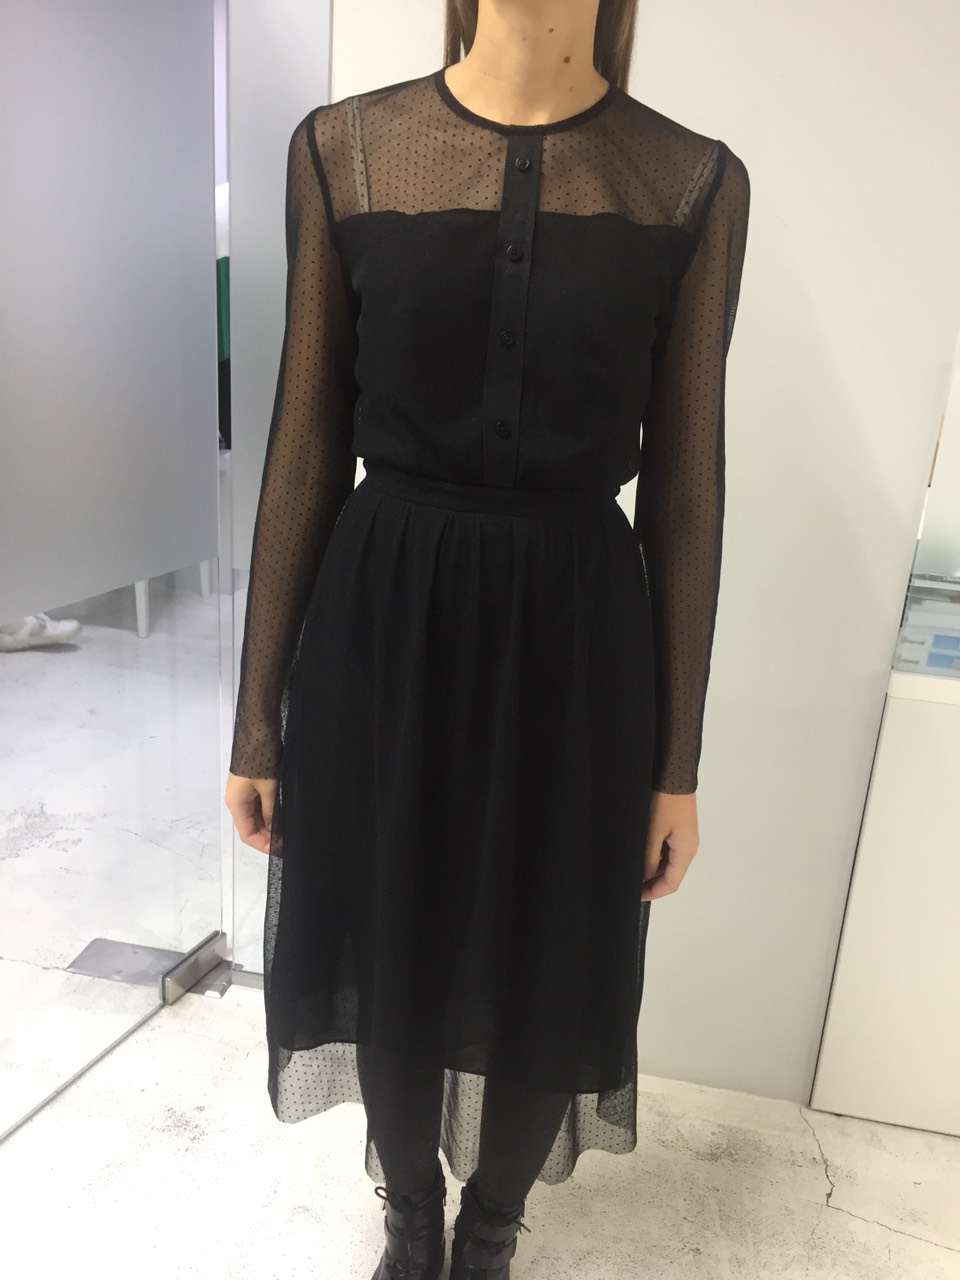 Black lace dress with buttons, photo 1